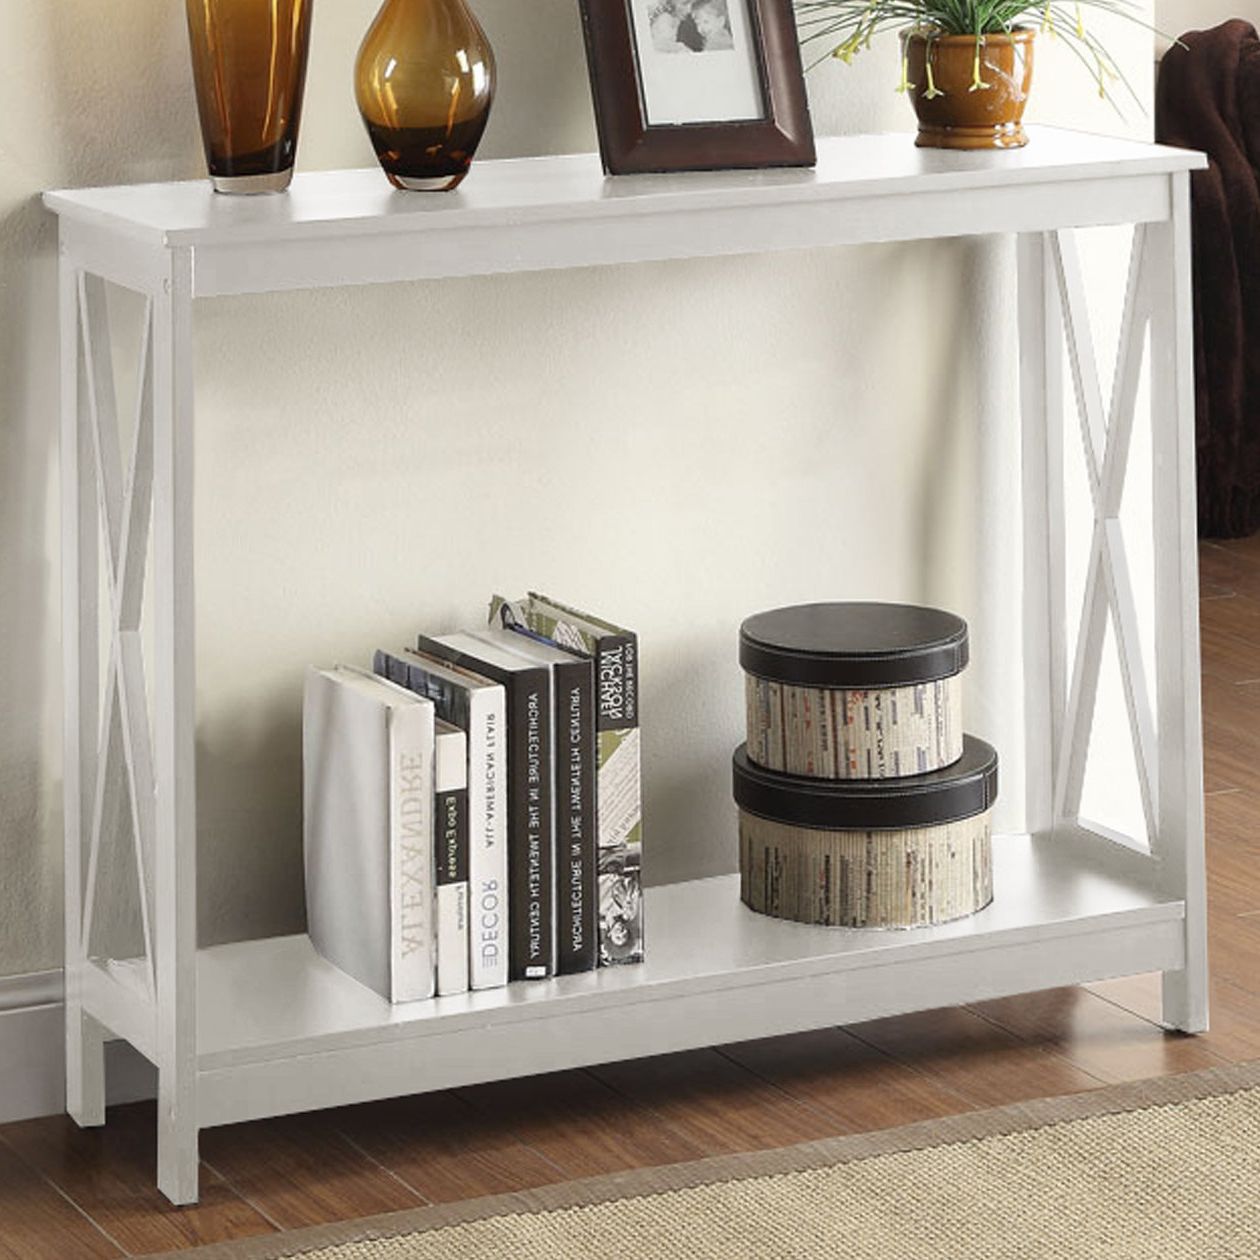 Wayfair Throughout Well Known Hand Carved White Wash Console Tables (View 7 of 20)